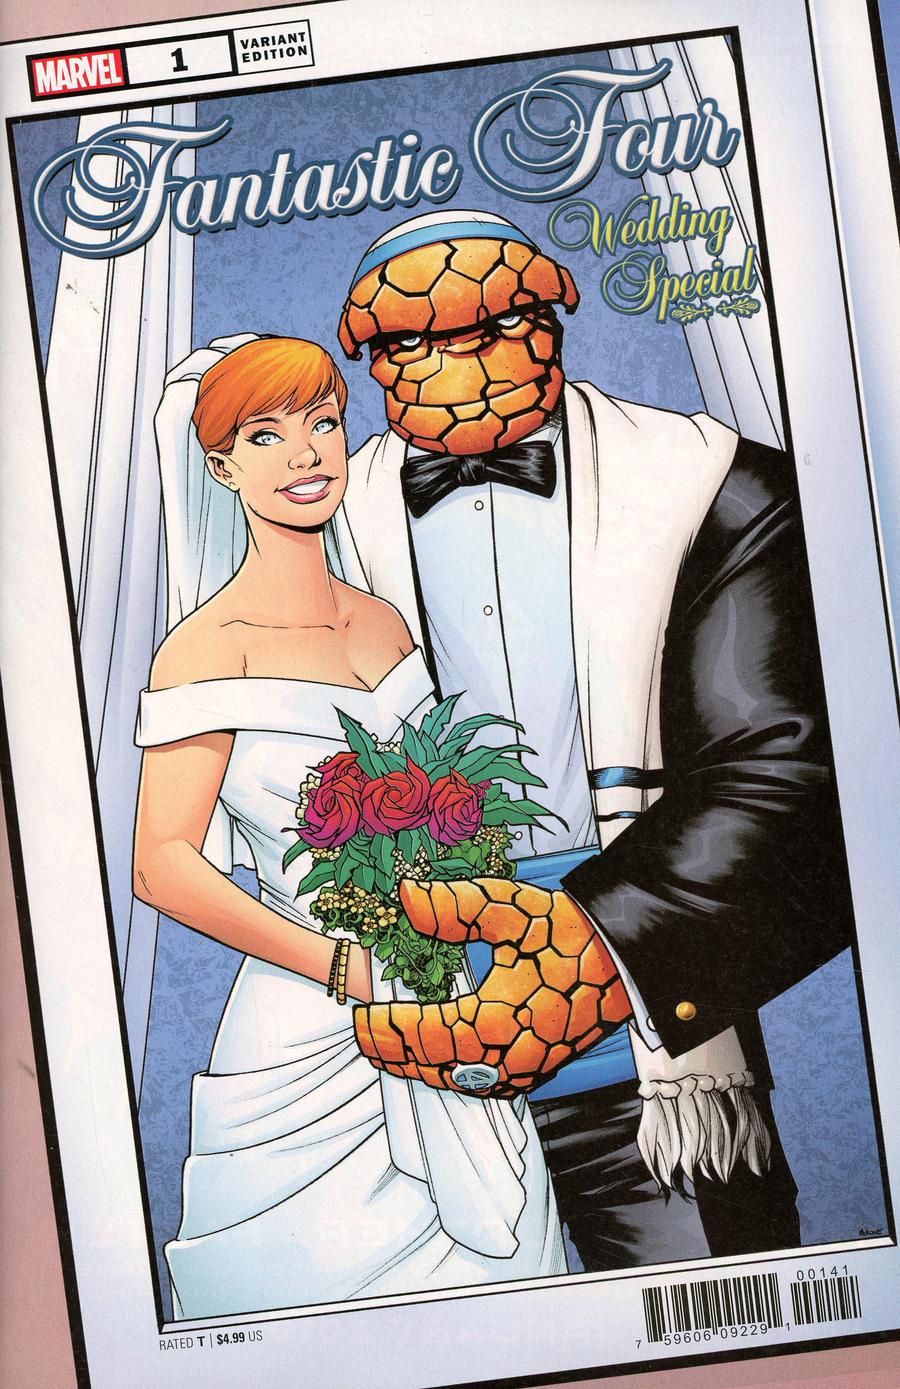 Fantastic Four Wedding Special #1 Cover C Variant Mike McKone Cover